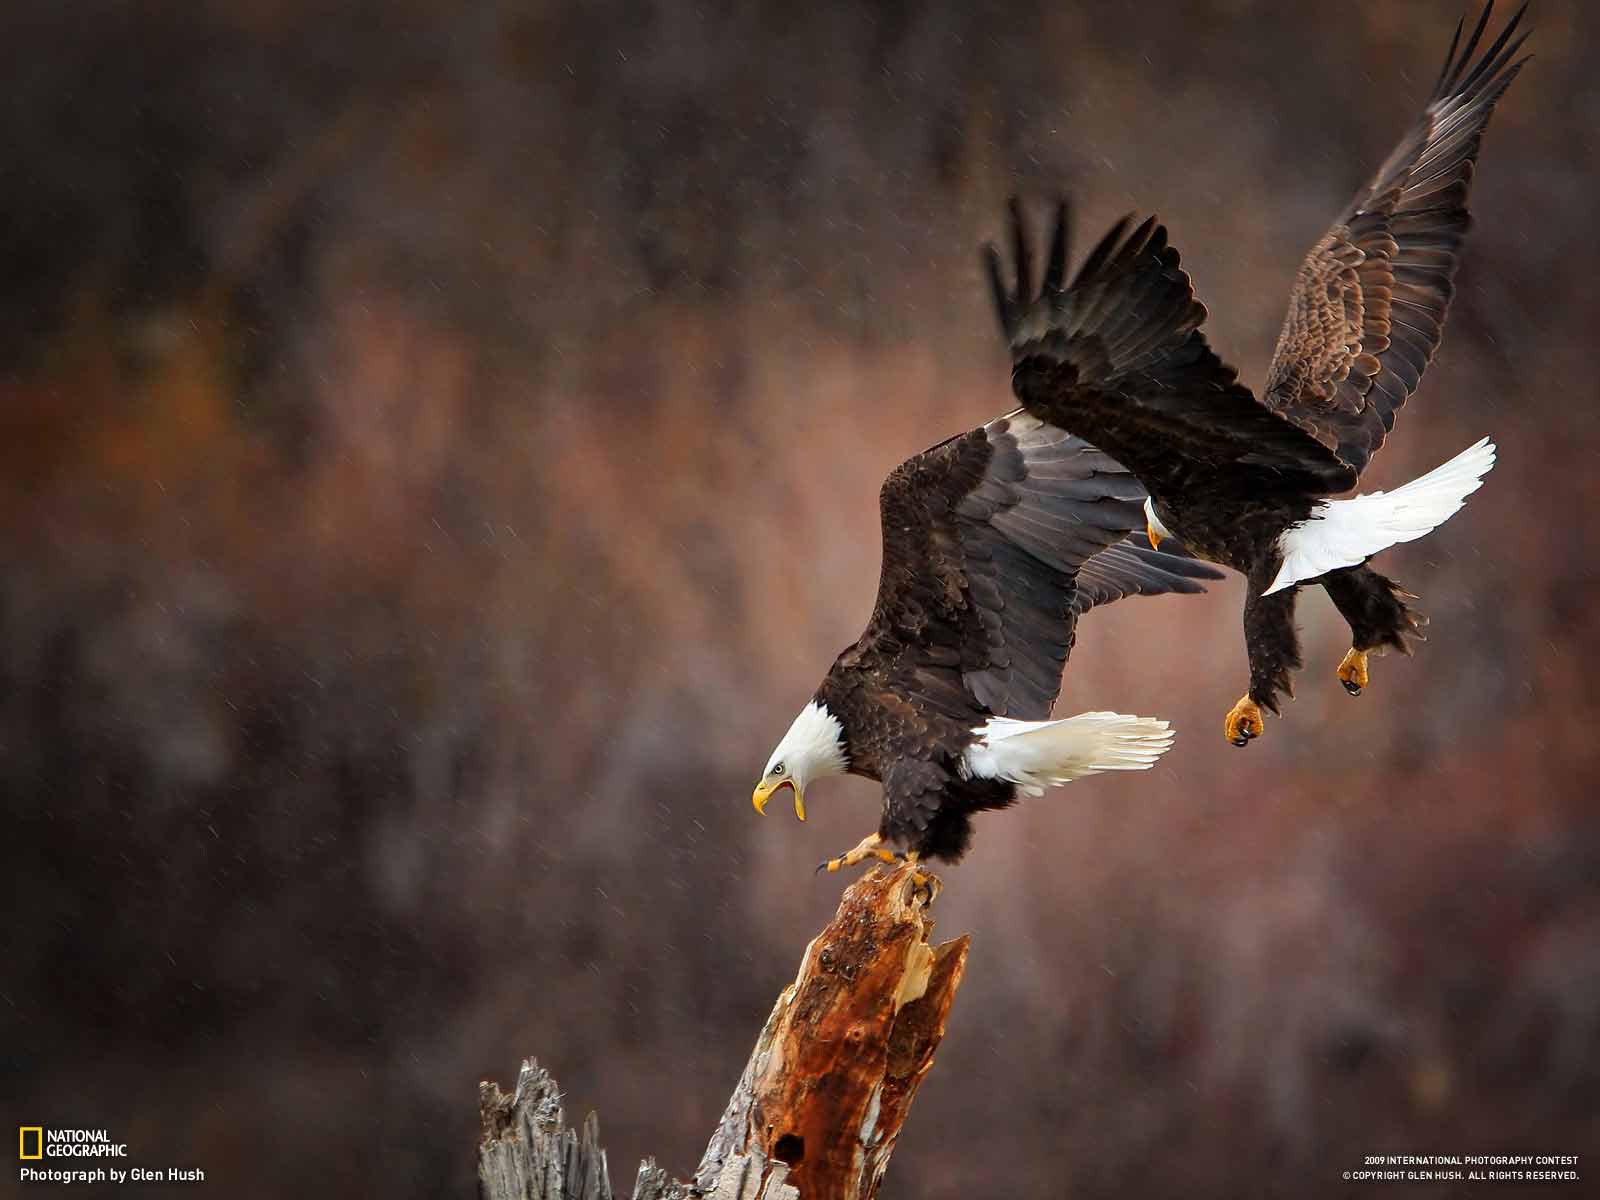 National Geographic 9 (40 wallpaper) Desktop wallpaper, beautiful picture. Daily update